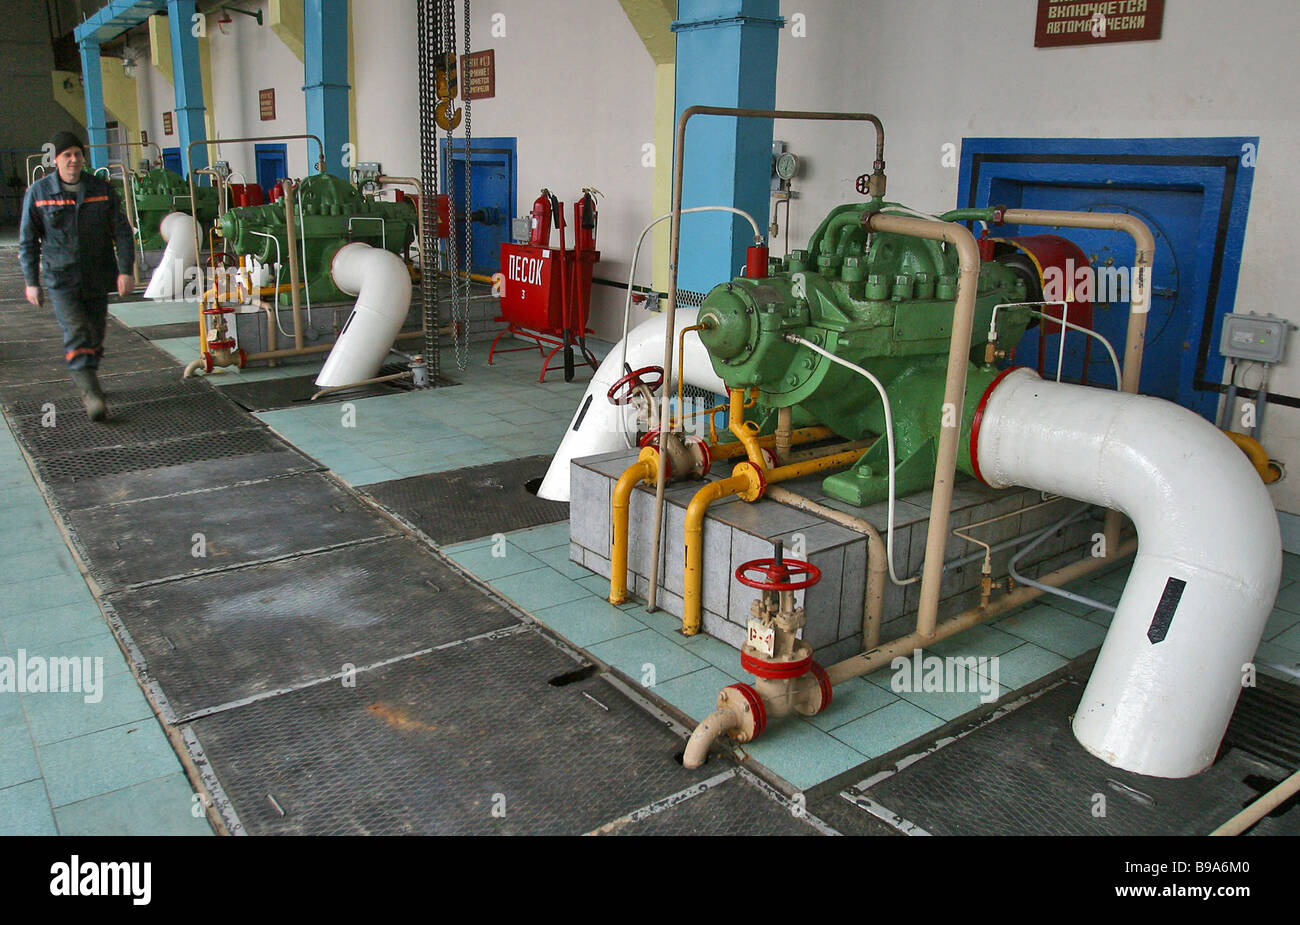 The pumping station of the Disna dispatch center of Zapadtransnefteprodukt a Russian company which delivers diesel fuel to Stock Photo